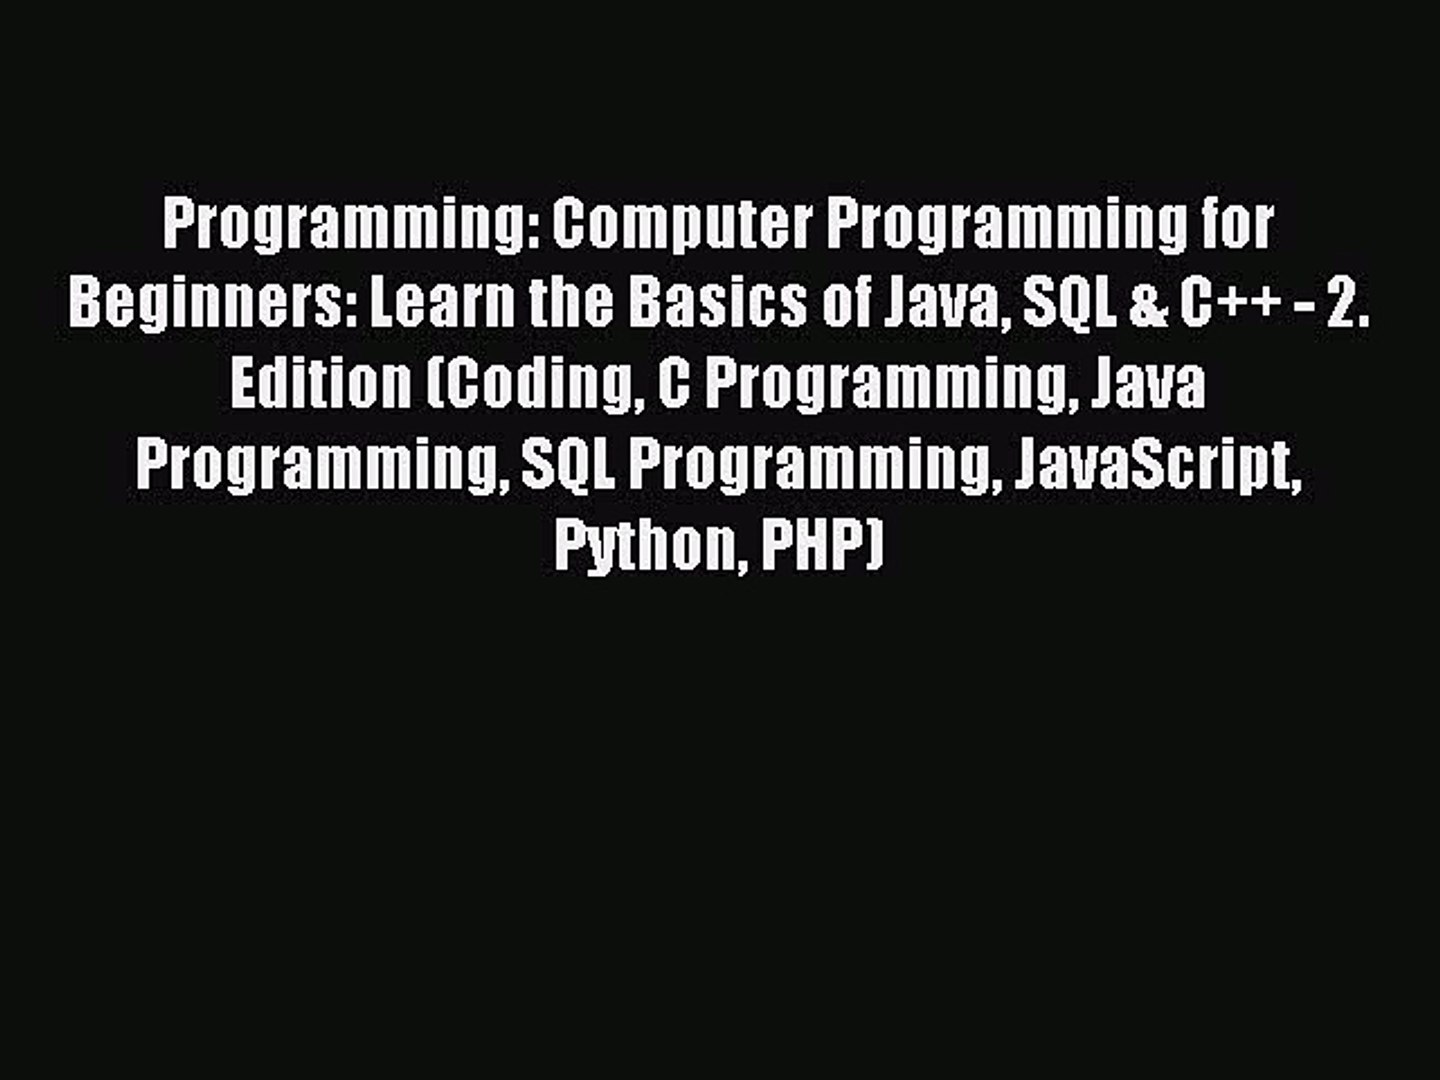 Read Programming: Computer Programming for Beginners: Learn the Basics of Java SQL & C++ -